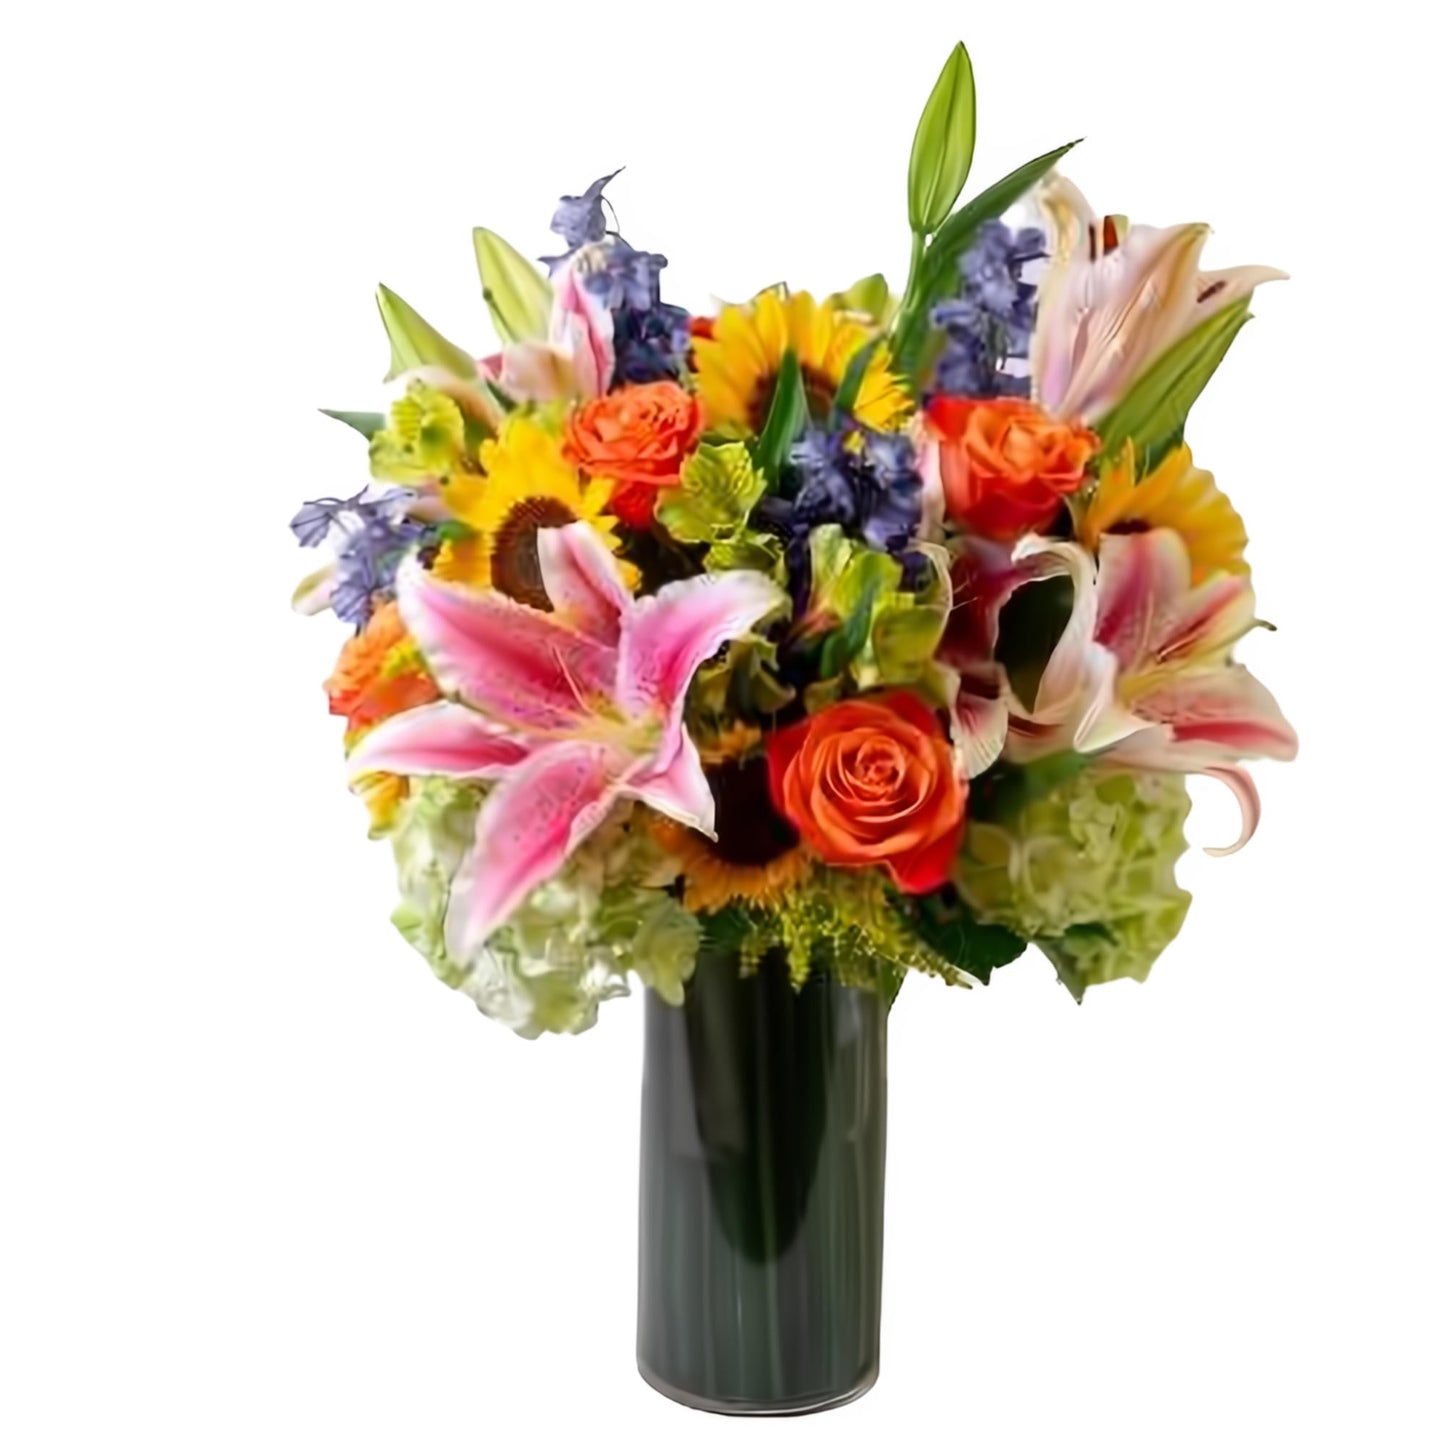 Birthday Fanfare is a lush and luxurious surprise brimming with bright, beautiful blooms, hand-arranged by Queens Flower Delivery, inside a classic glass vase for the ultimate in elegance.